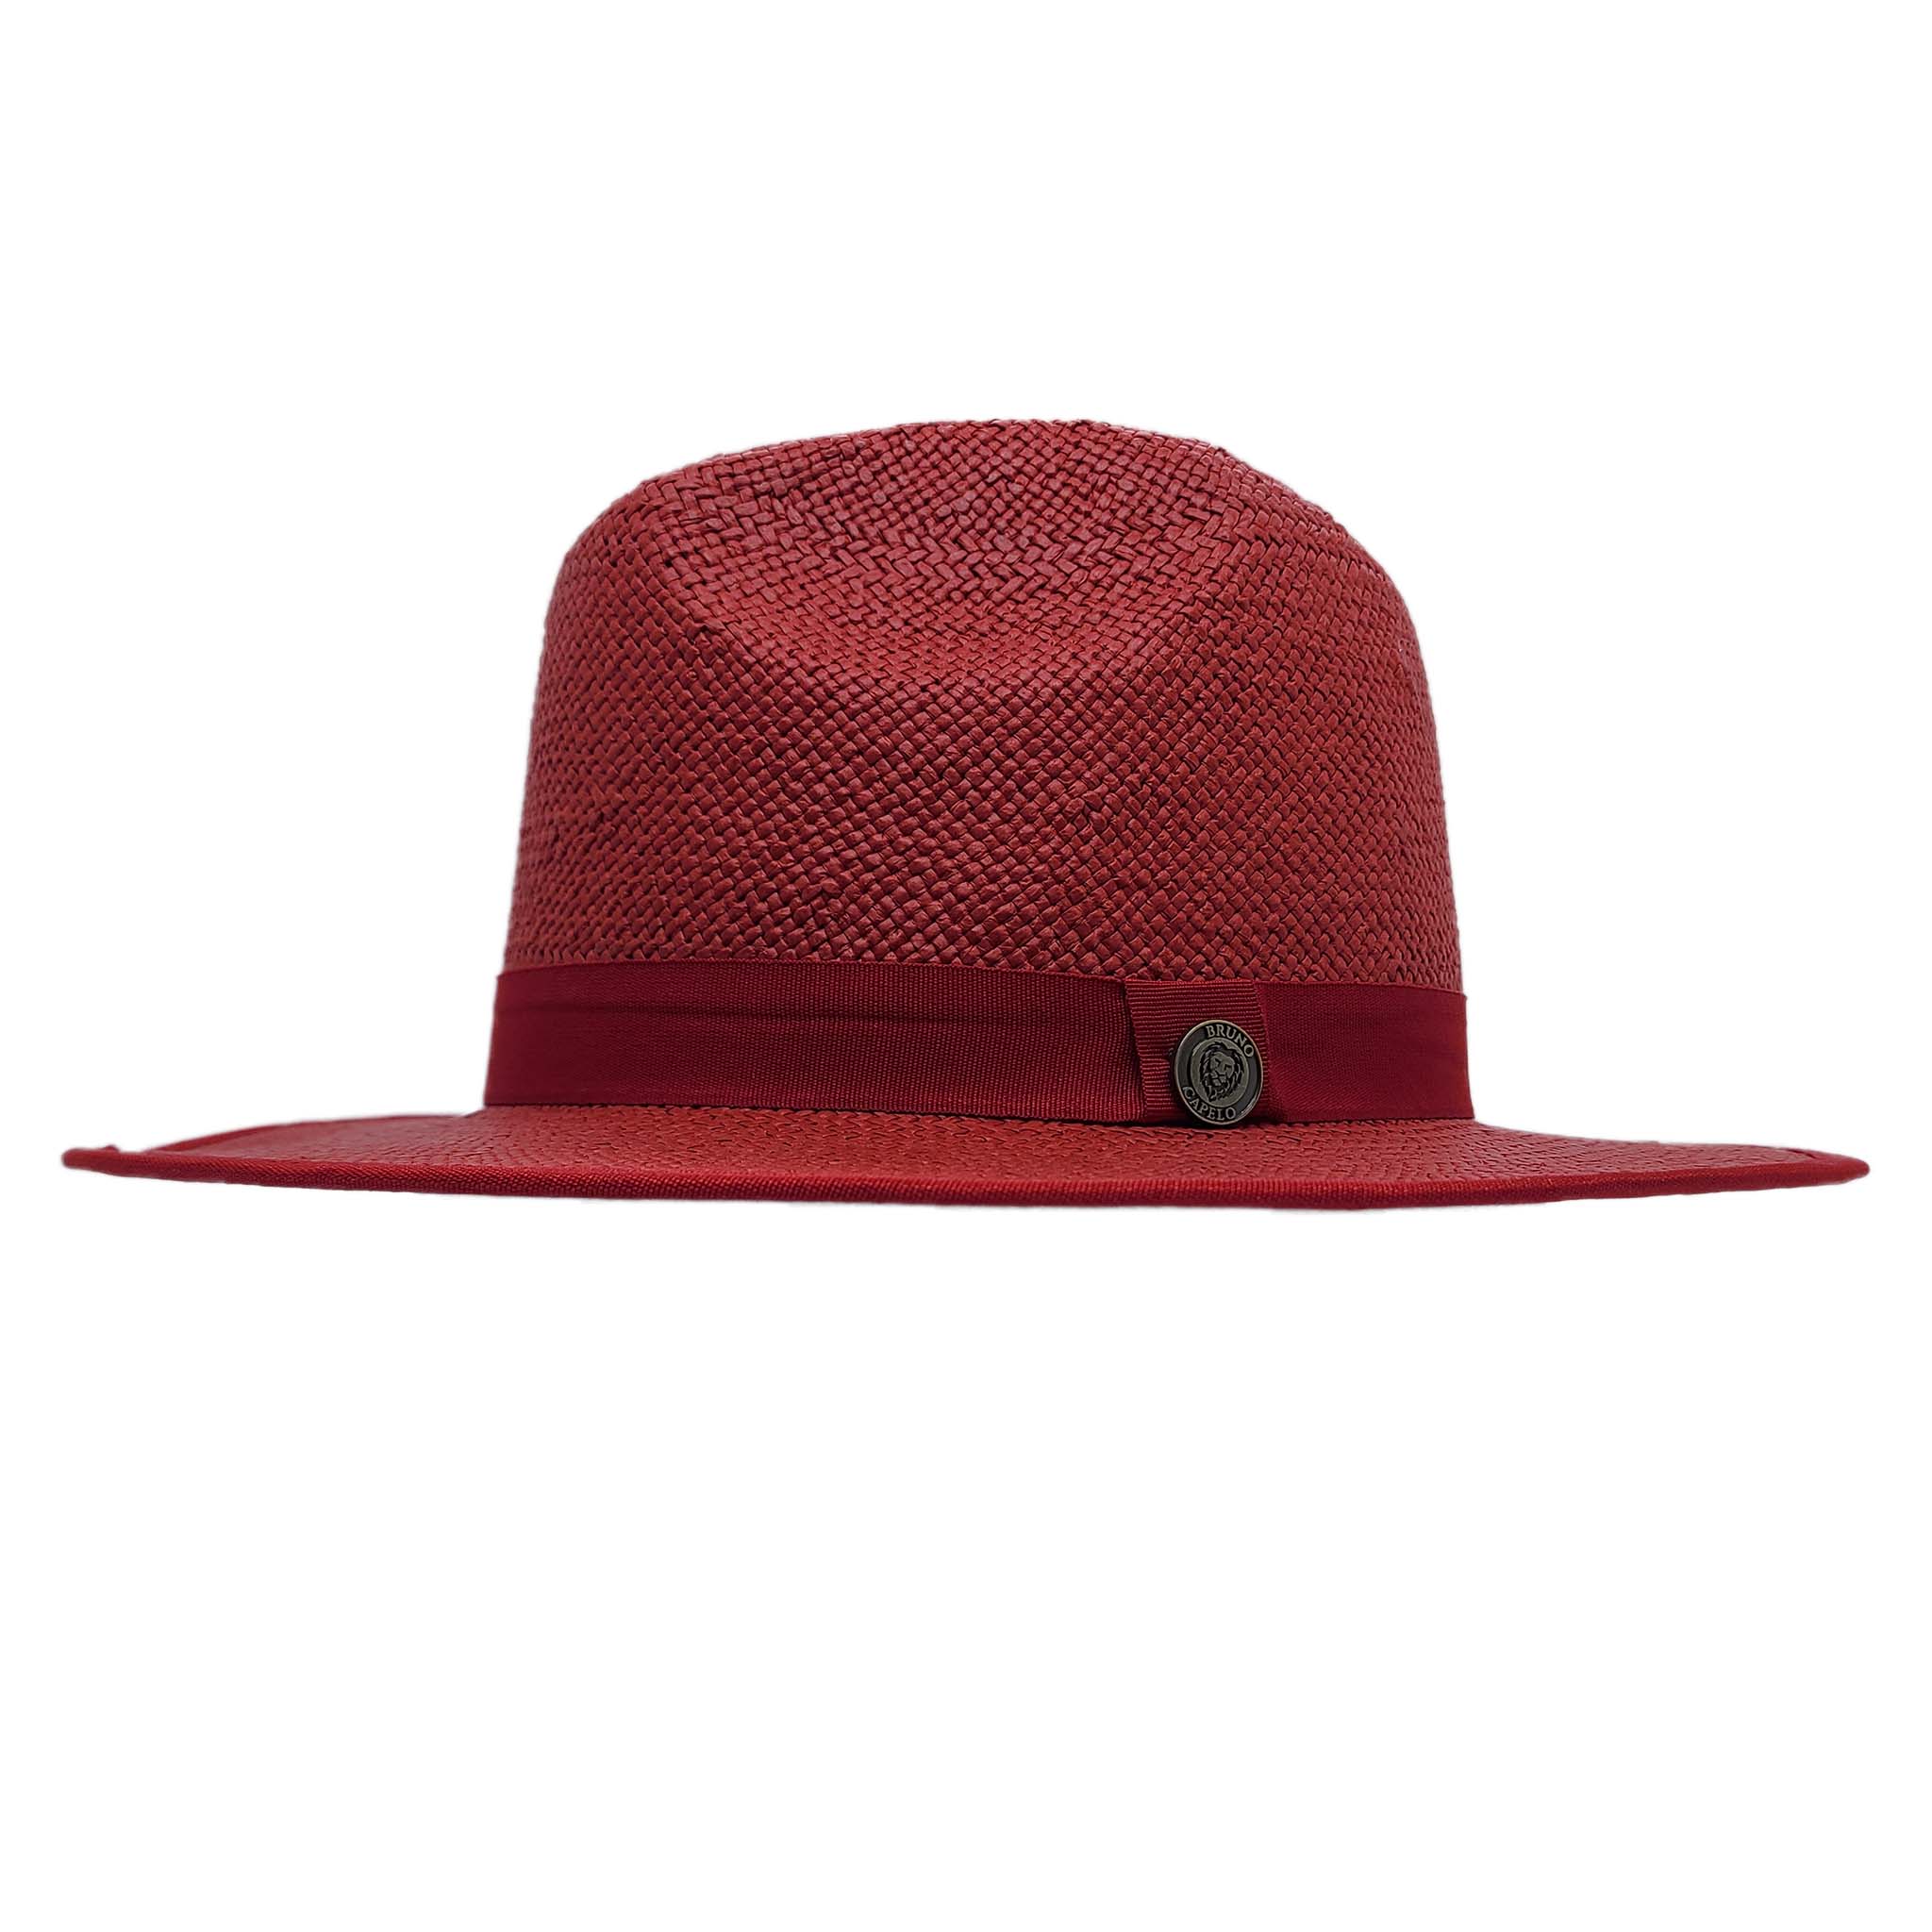 Red Wide-Brim Contrast Bottom Straw Hat - Front View